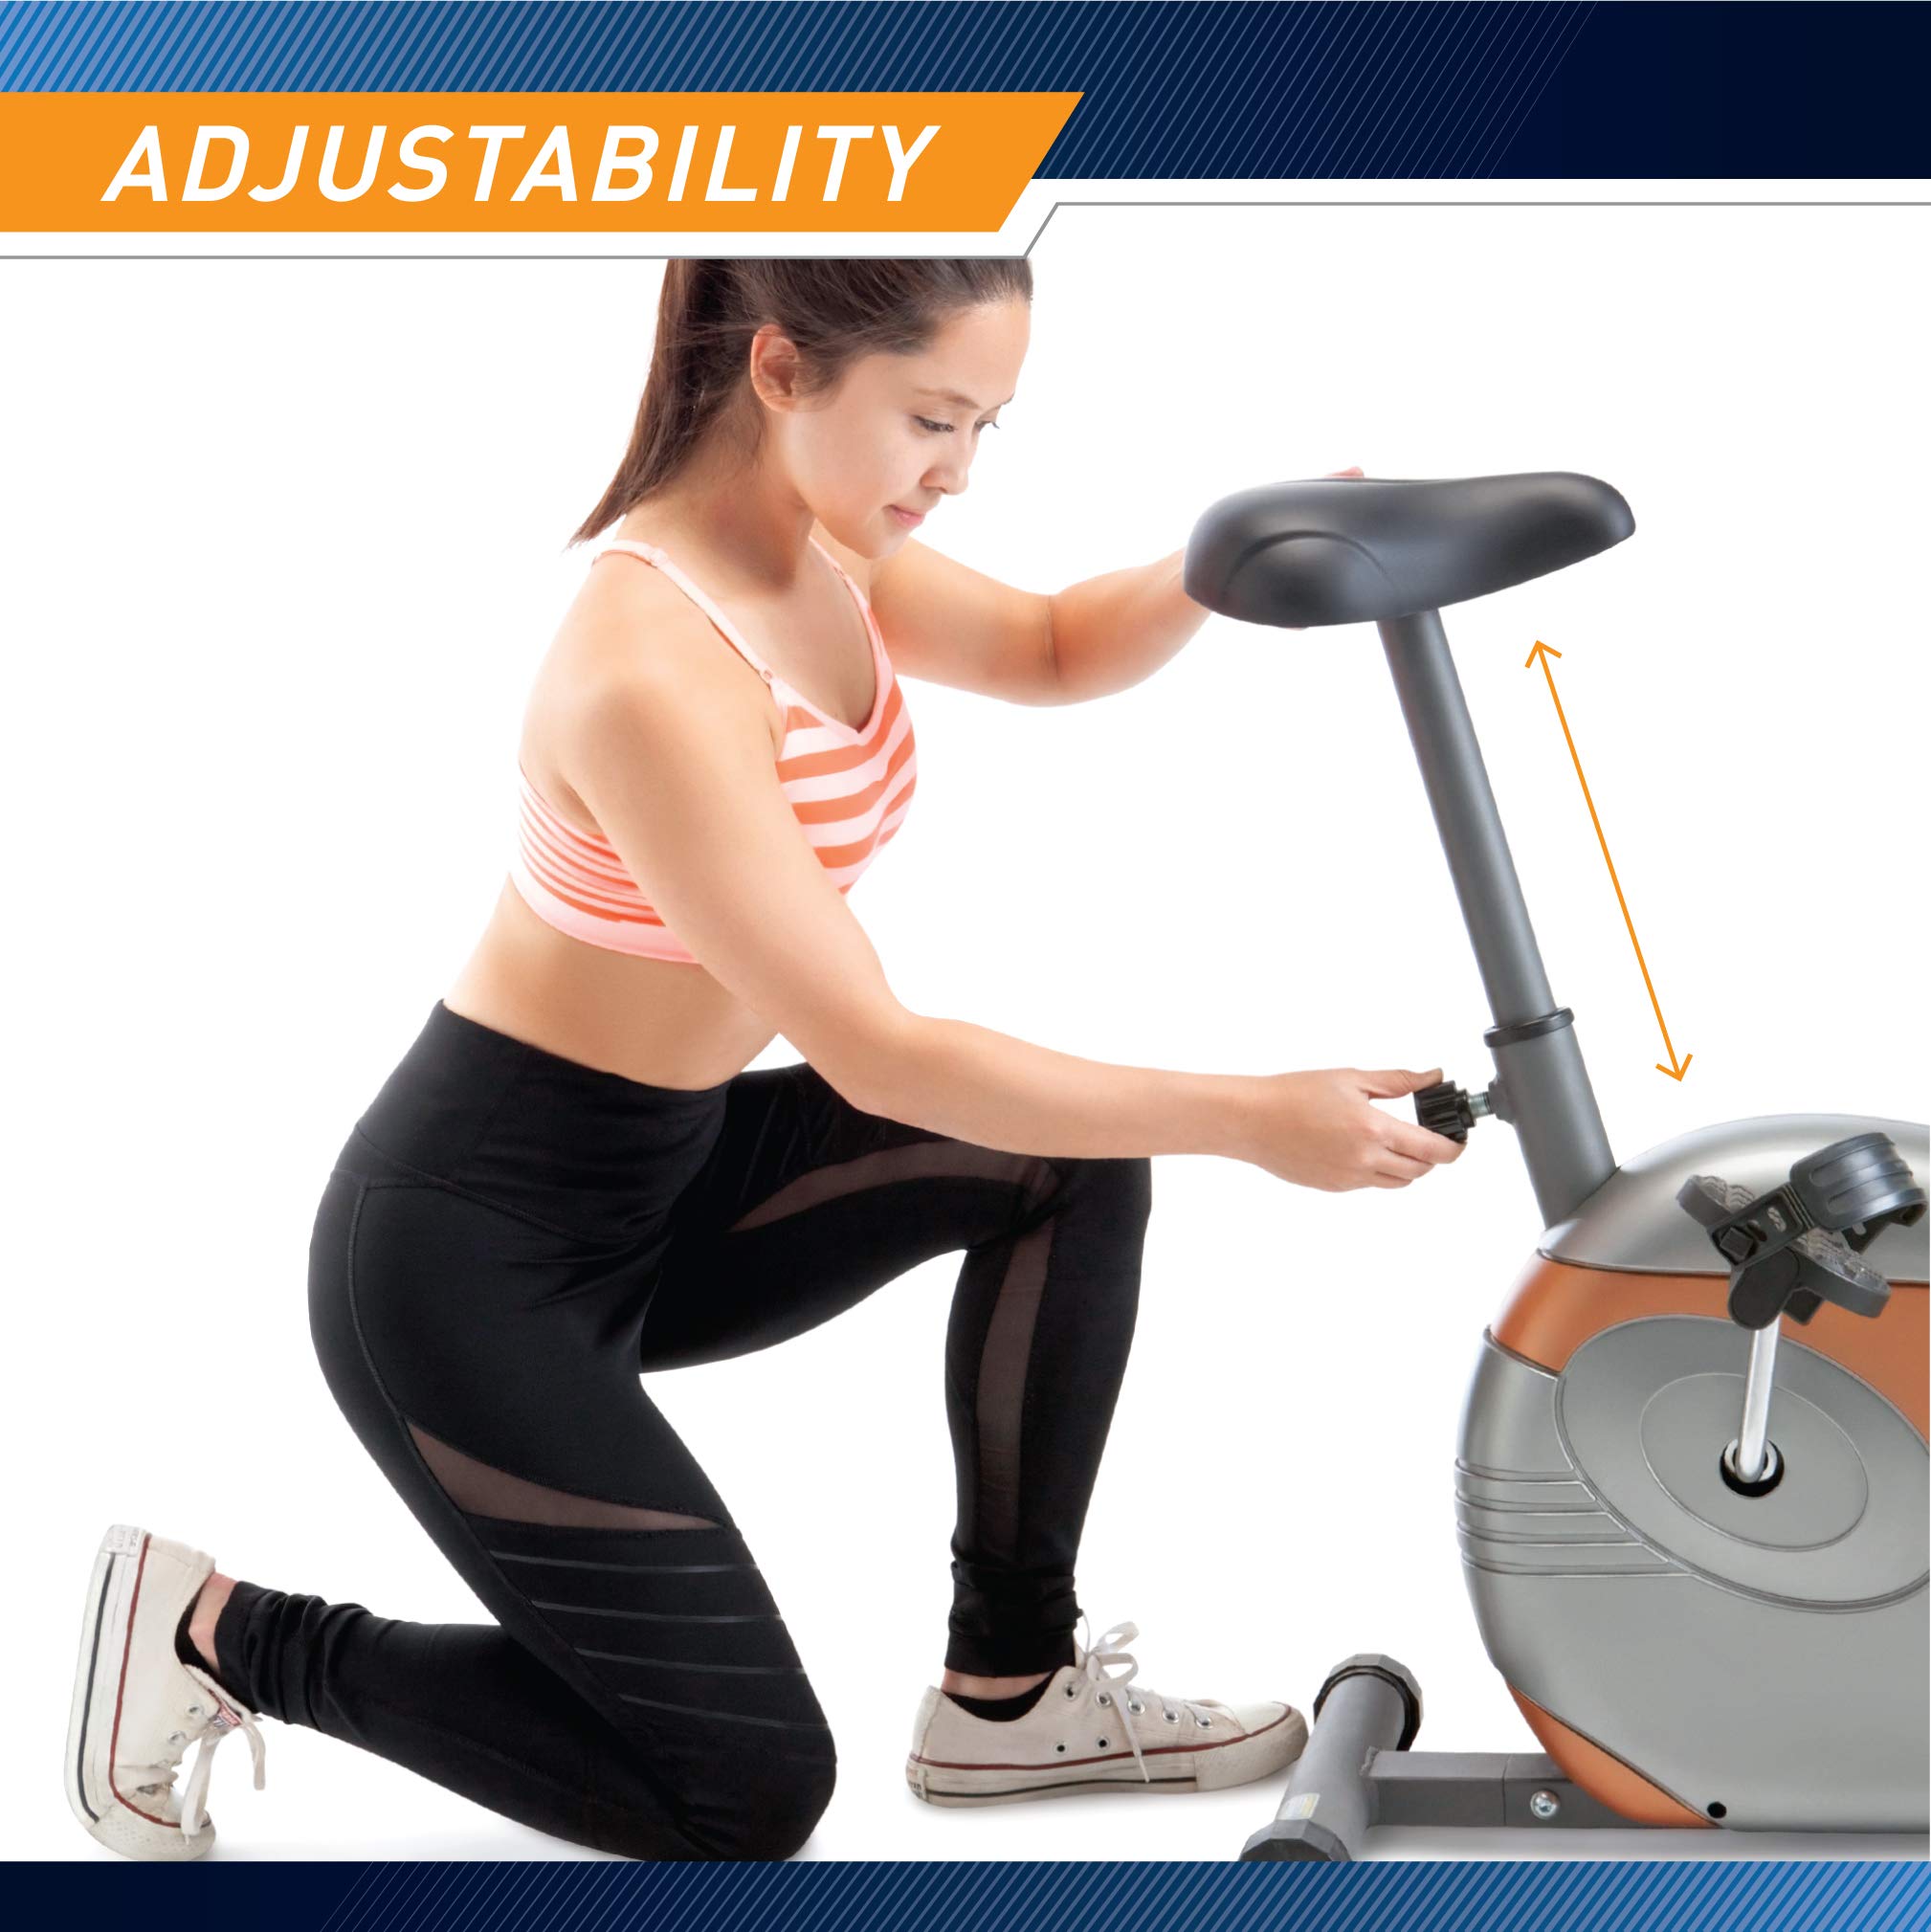 Marcy Upright Exercise Bike with Resistance ME-708